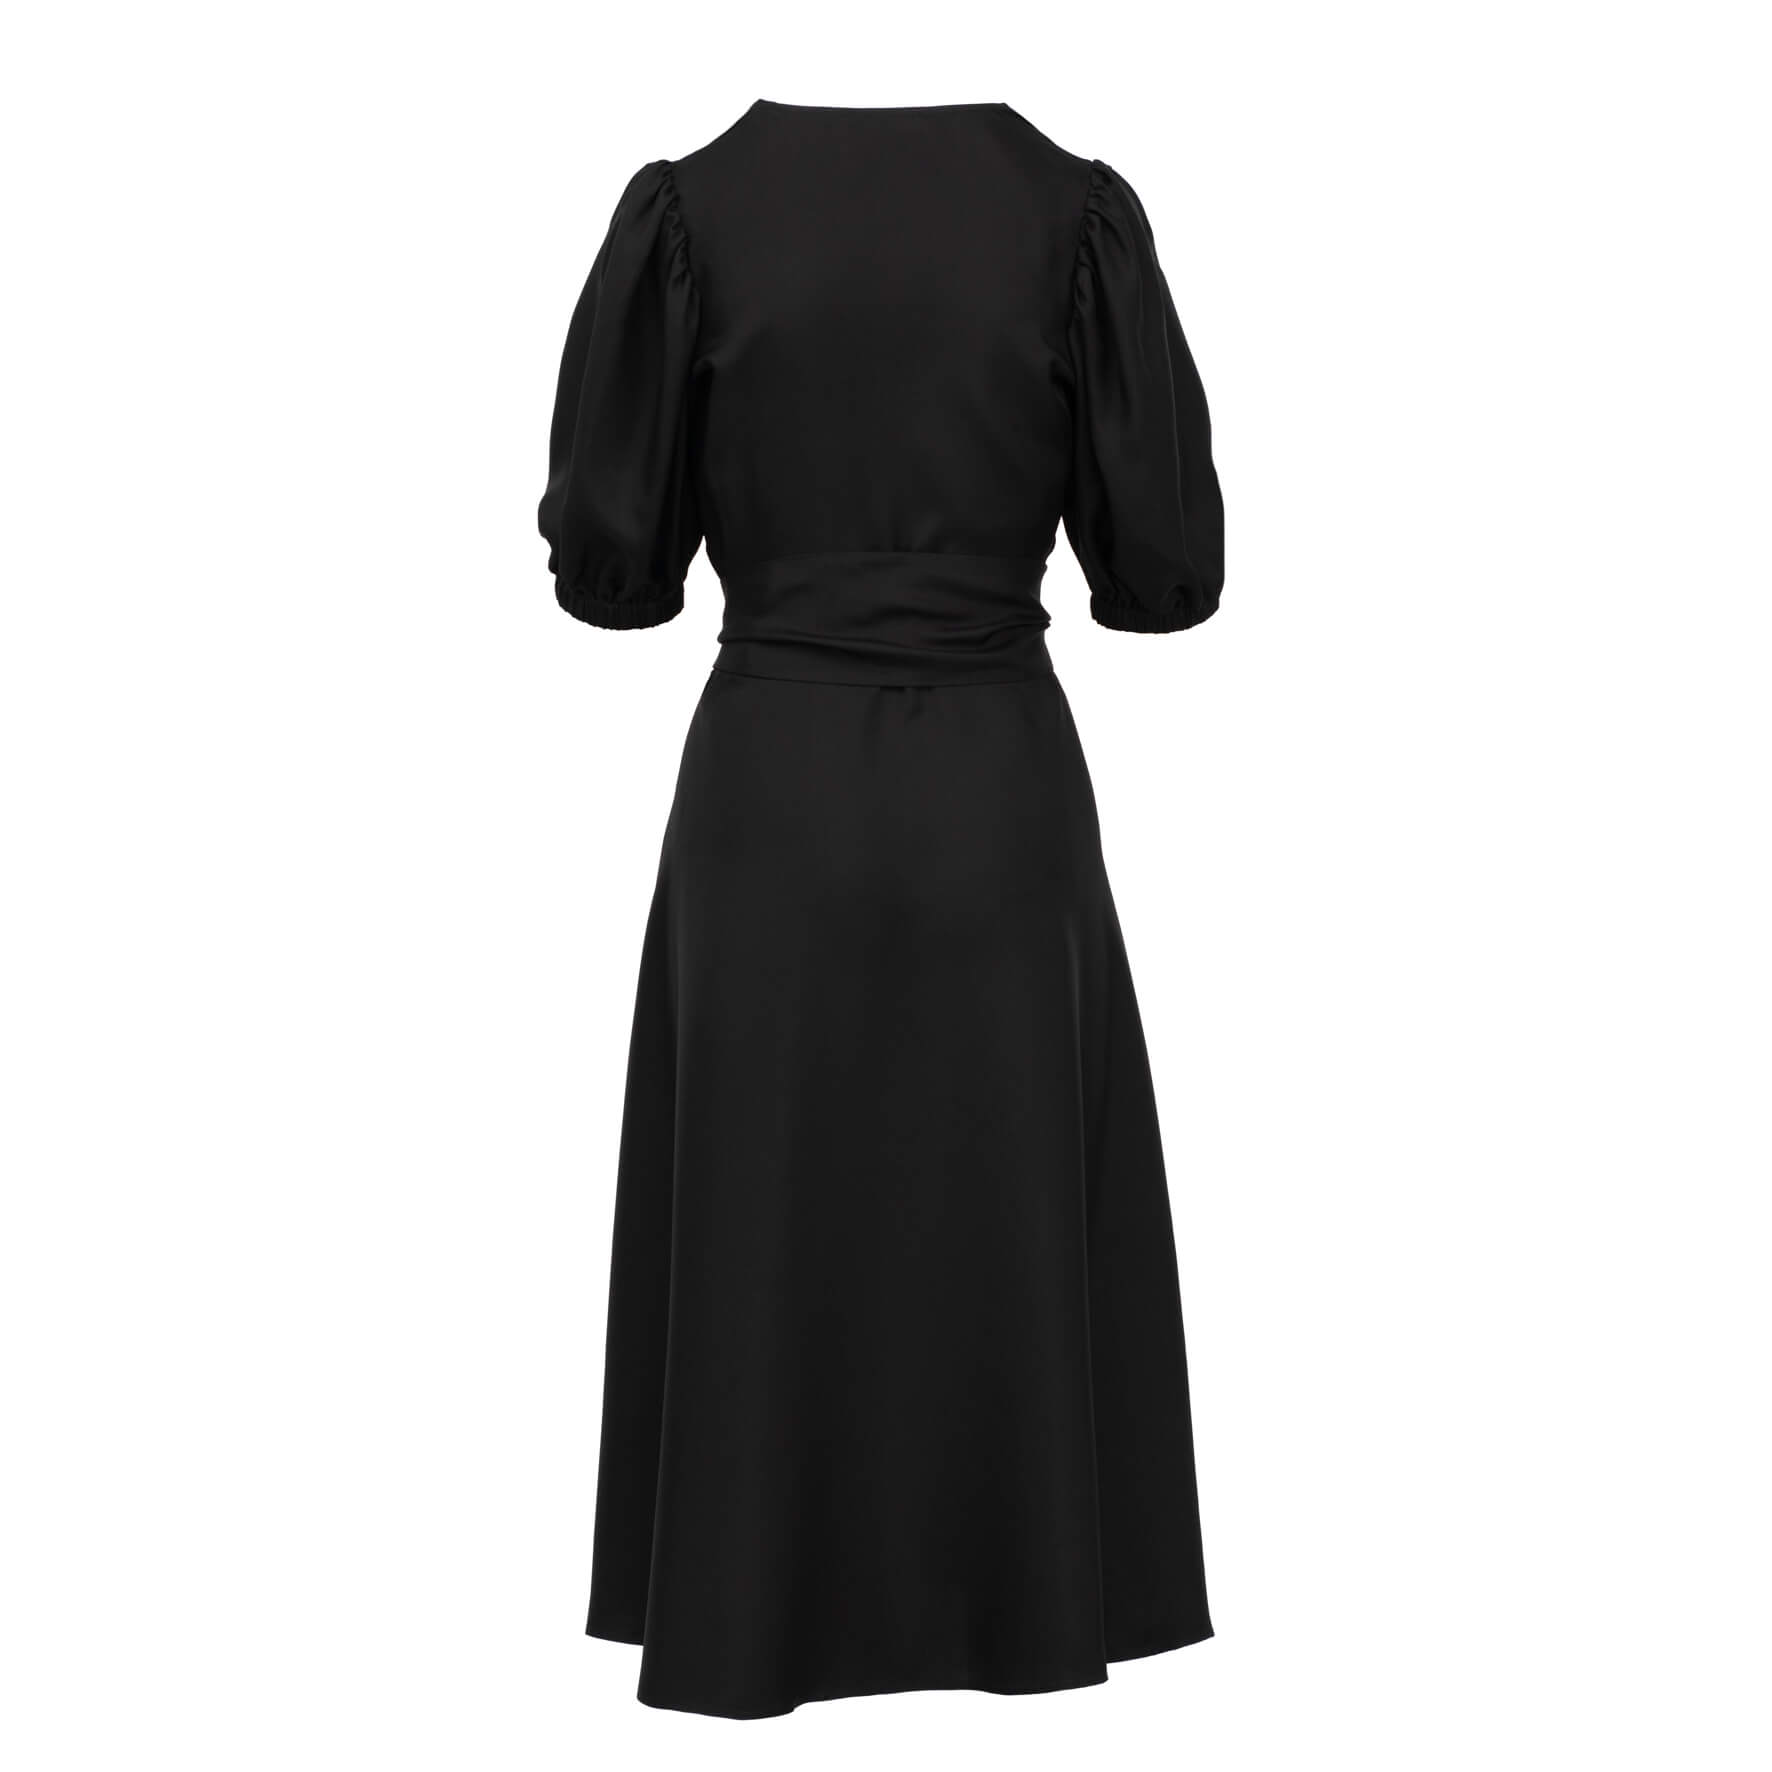 SILK DRESS WITH BUTTONS IN BLACK